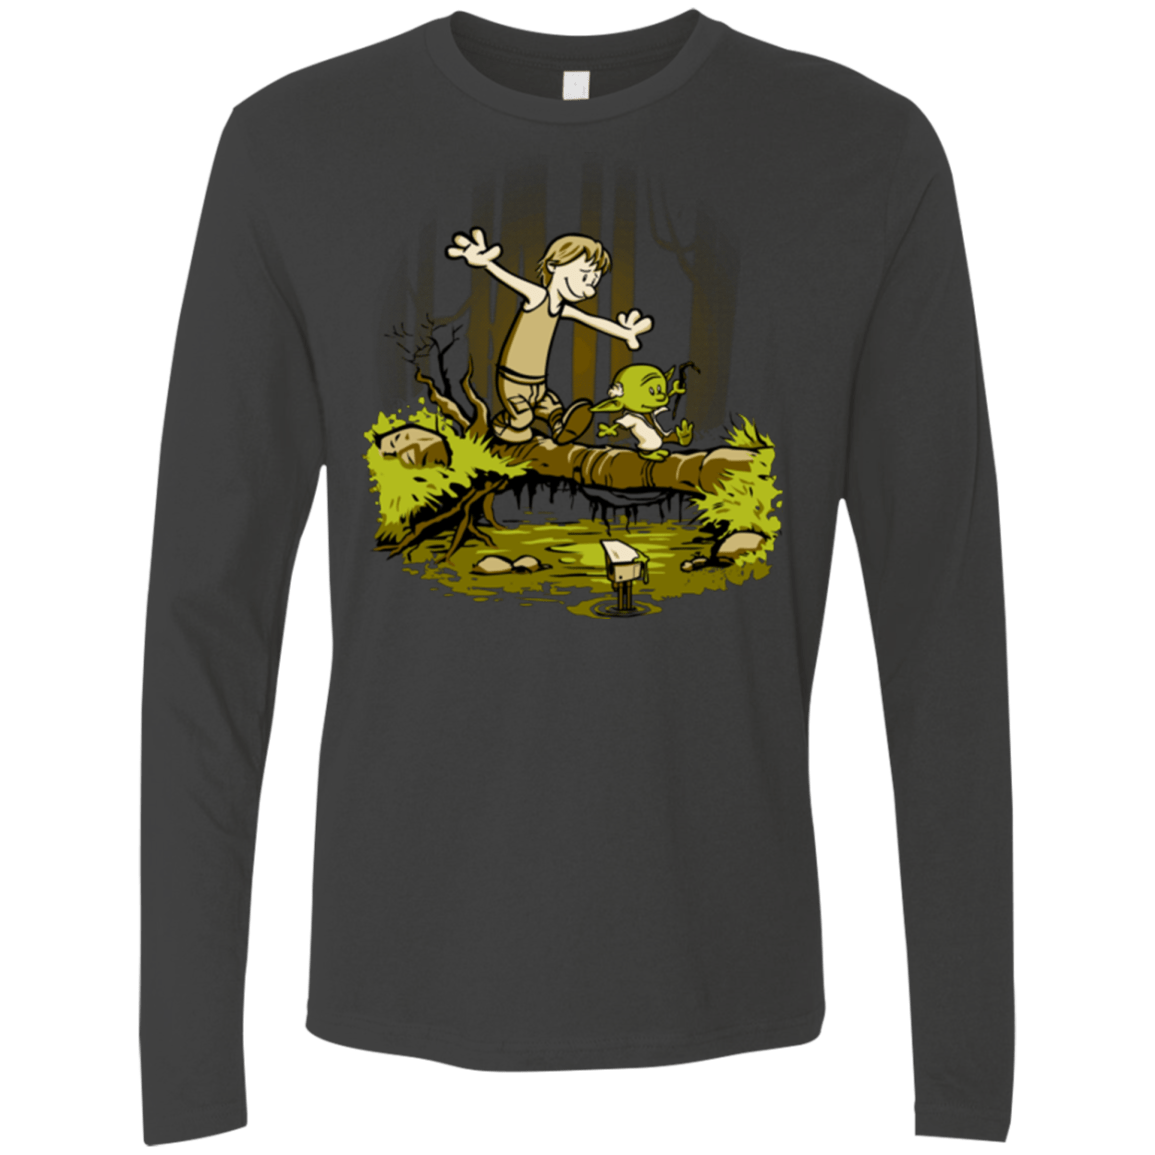 T-Shirts Heavy Metal / Small Training We Are Men's Premium Long Sleeve